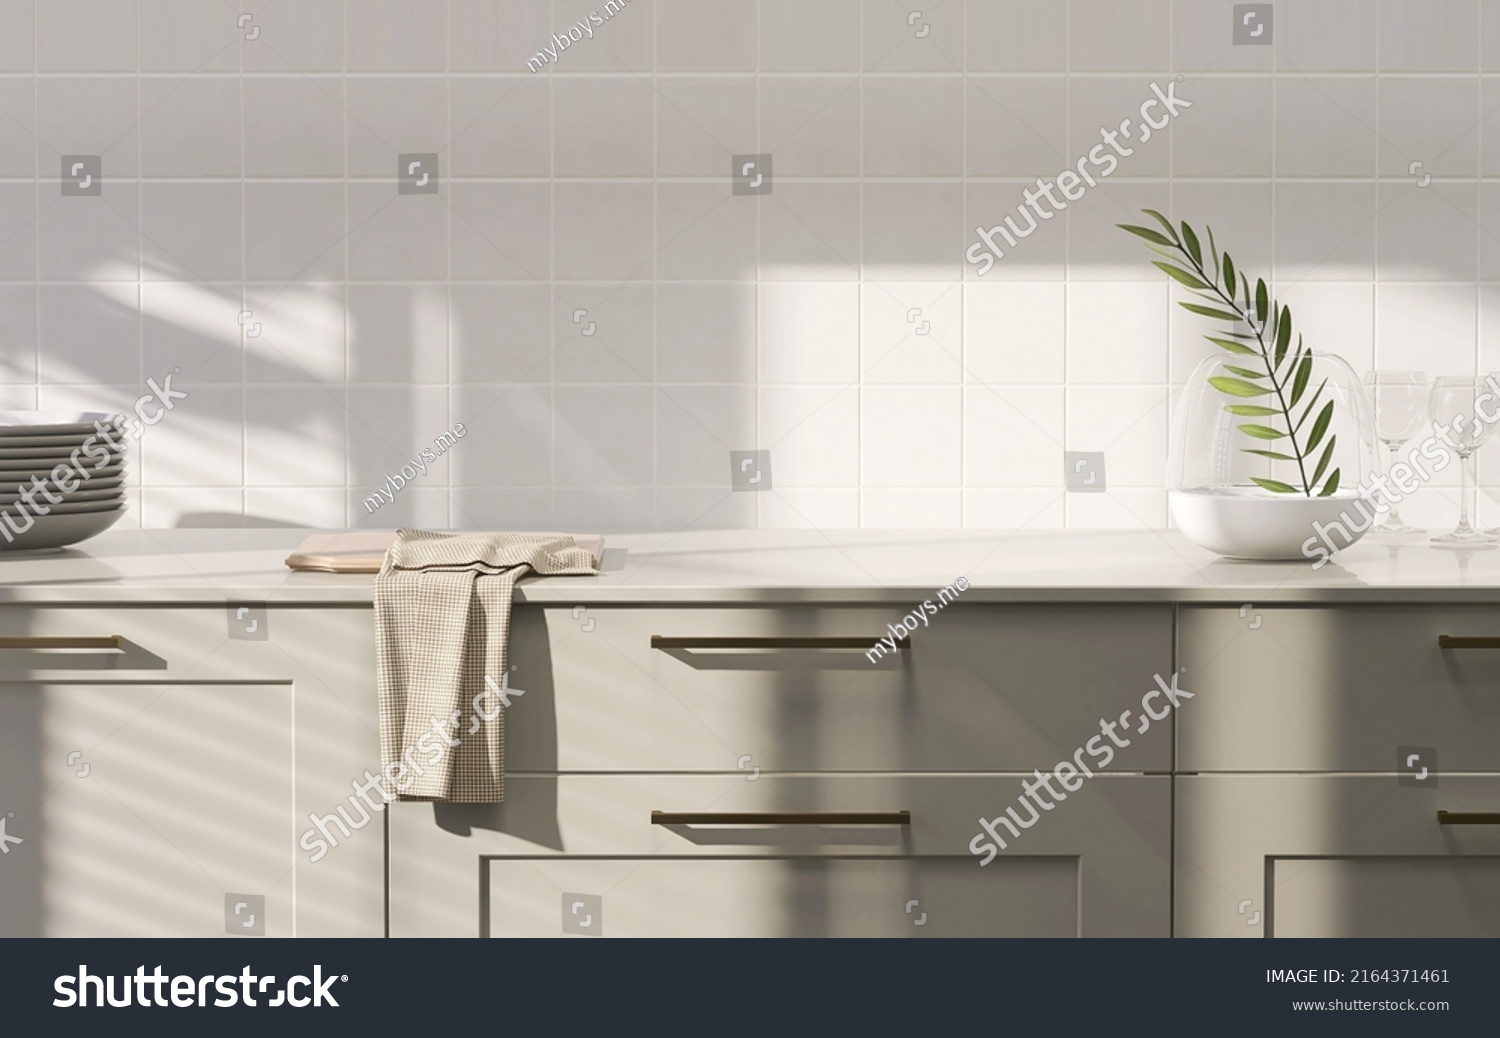 Stock Photo Realistic D Render Close Up Blank Empty Space Countertop In Modern Grey Build In Kitchen Cabinet 2164371461 